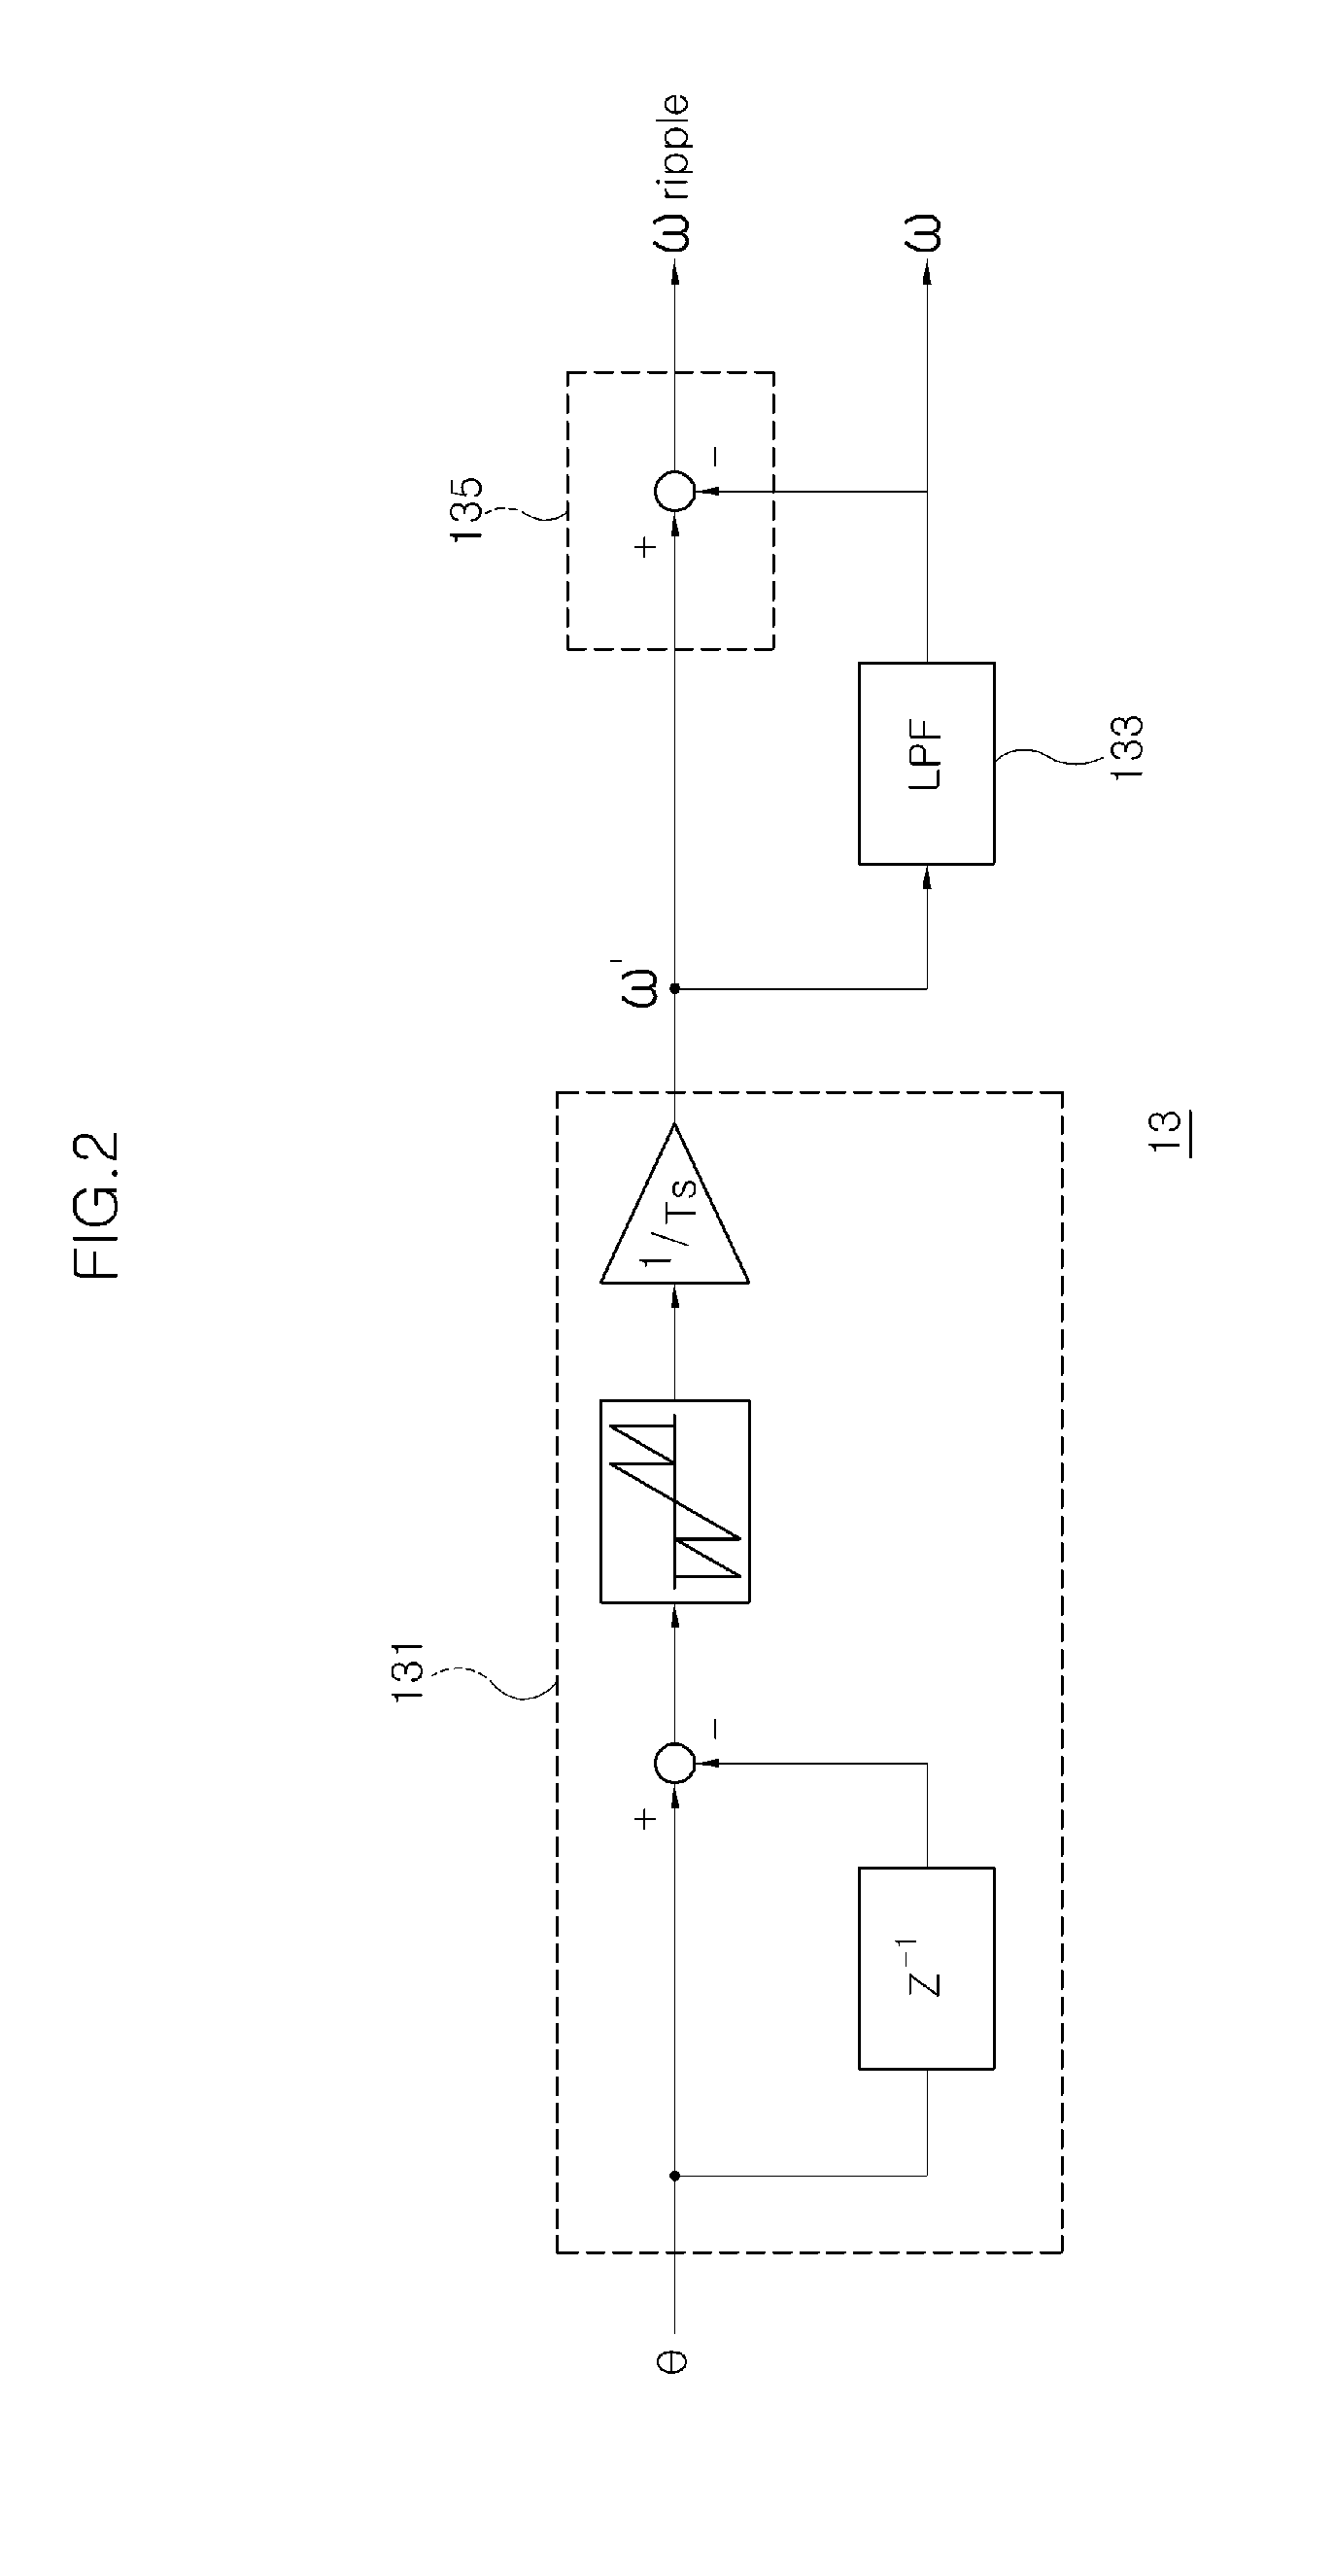 Method for adaptively compensating position error of resolver